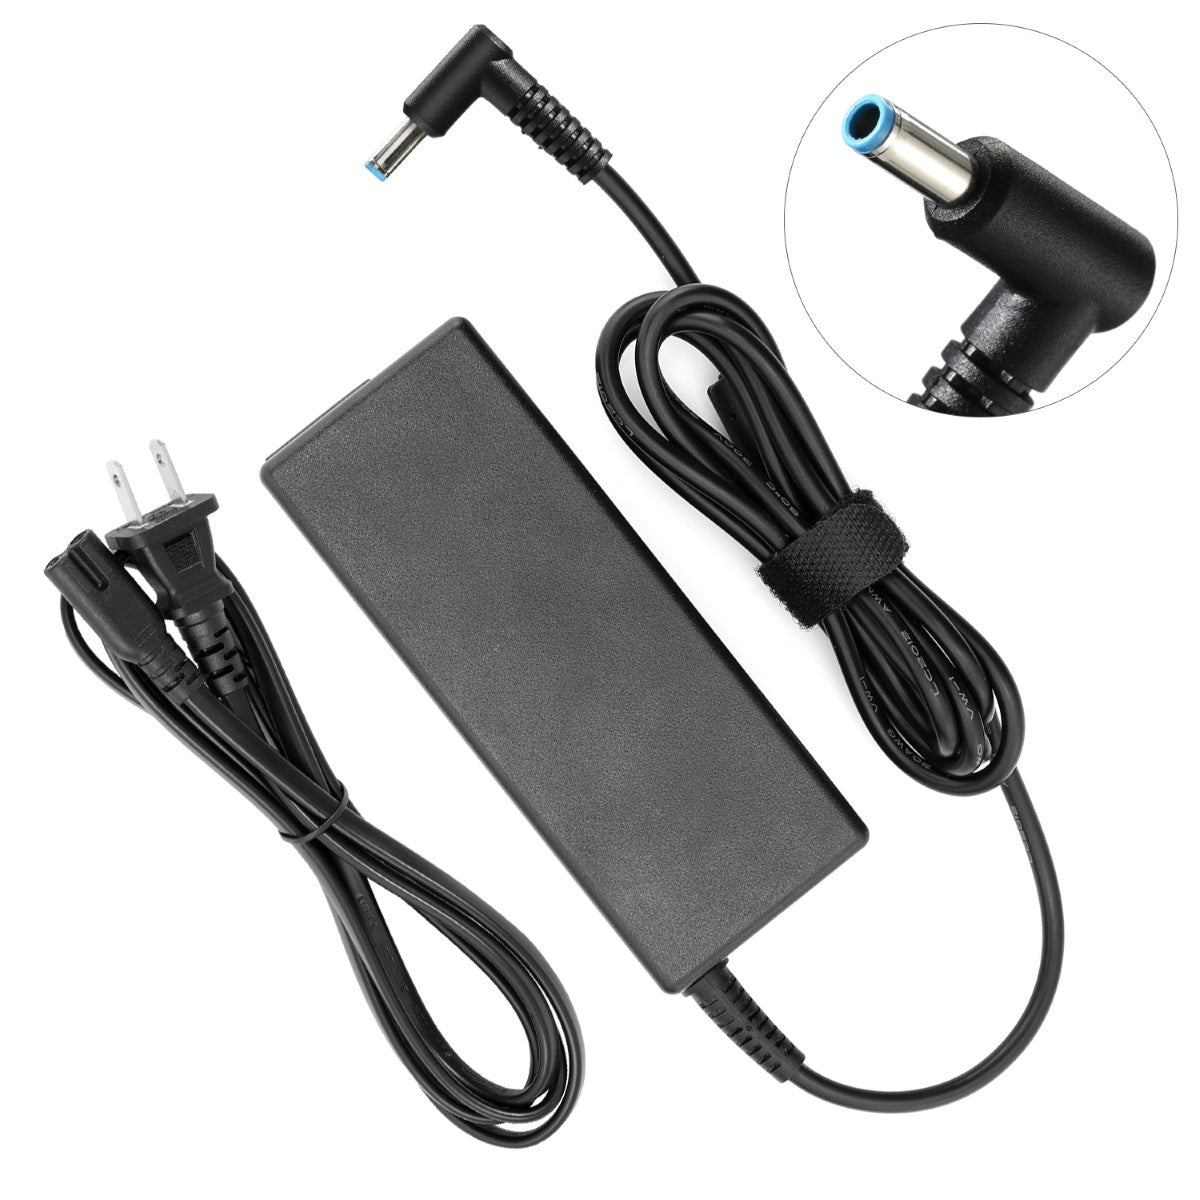 AC Adapter Charger for HP Pavilion Touchsmart 17t-f000 Notebook.